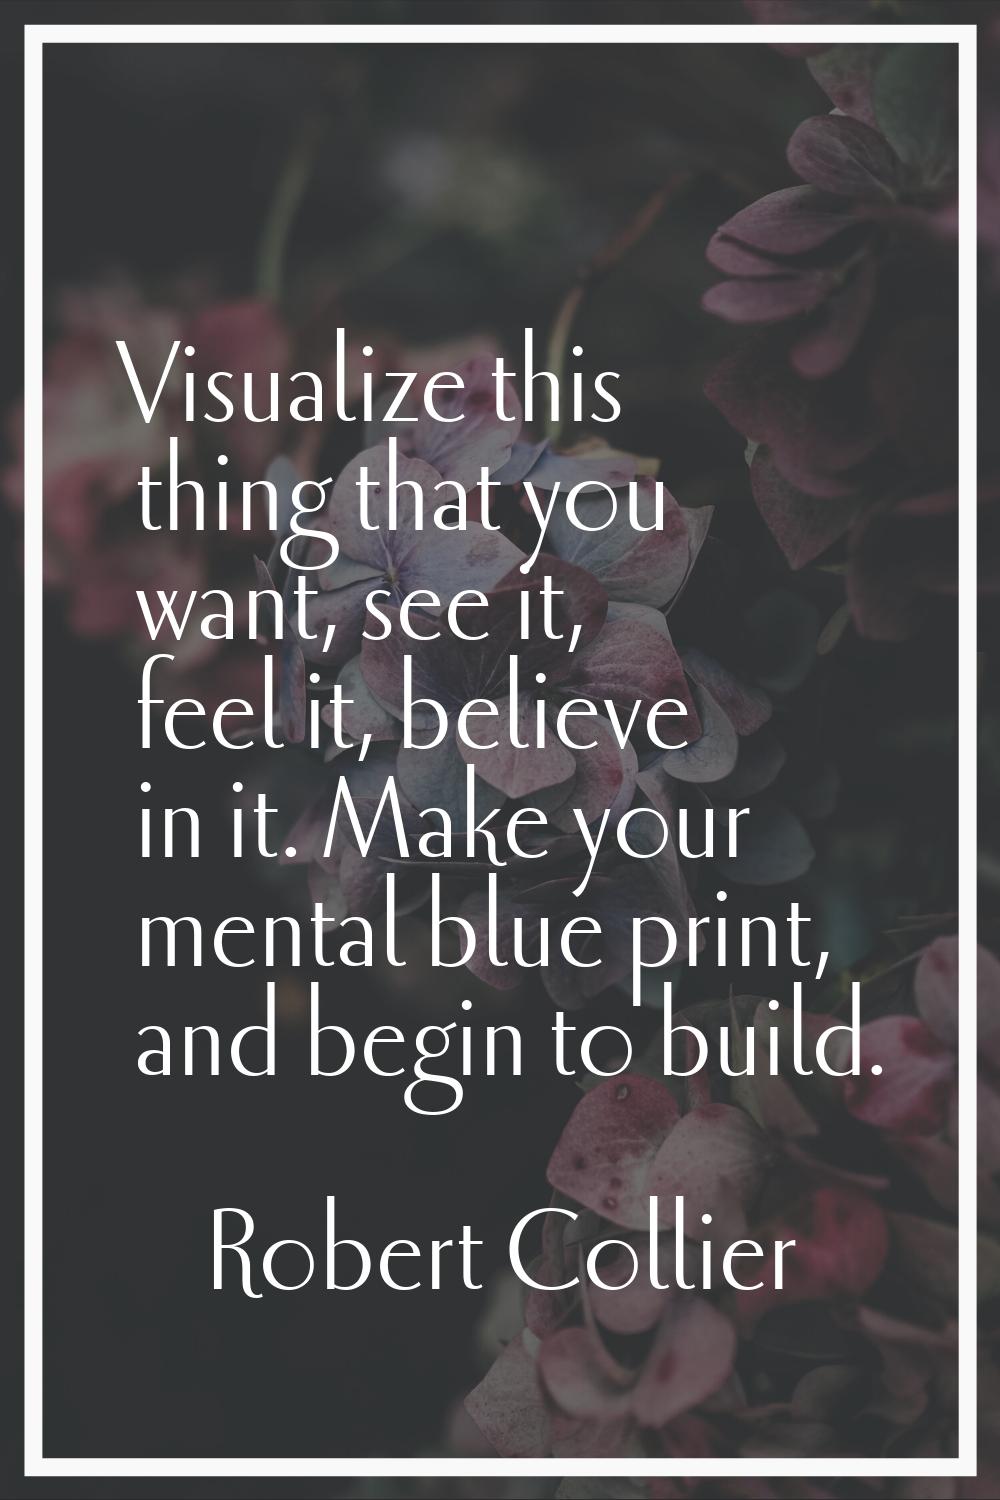 Visualize this thing that you want, see it, feel it, believe in it. Make your mental blue print, an